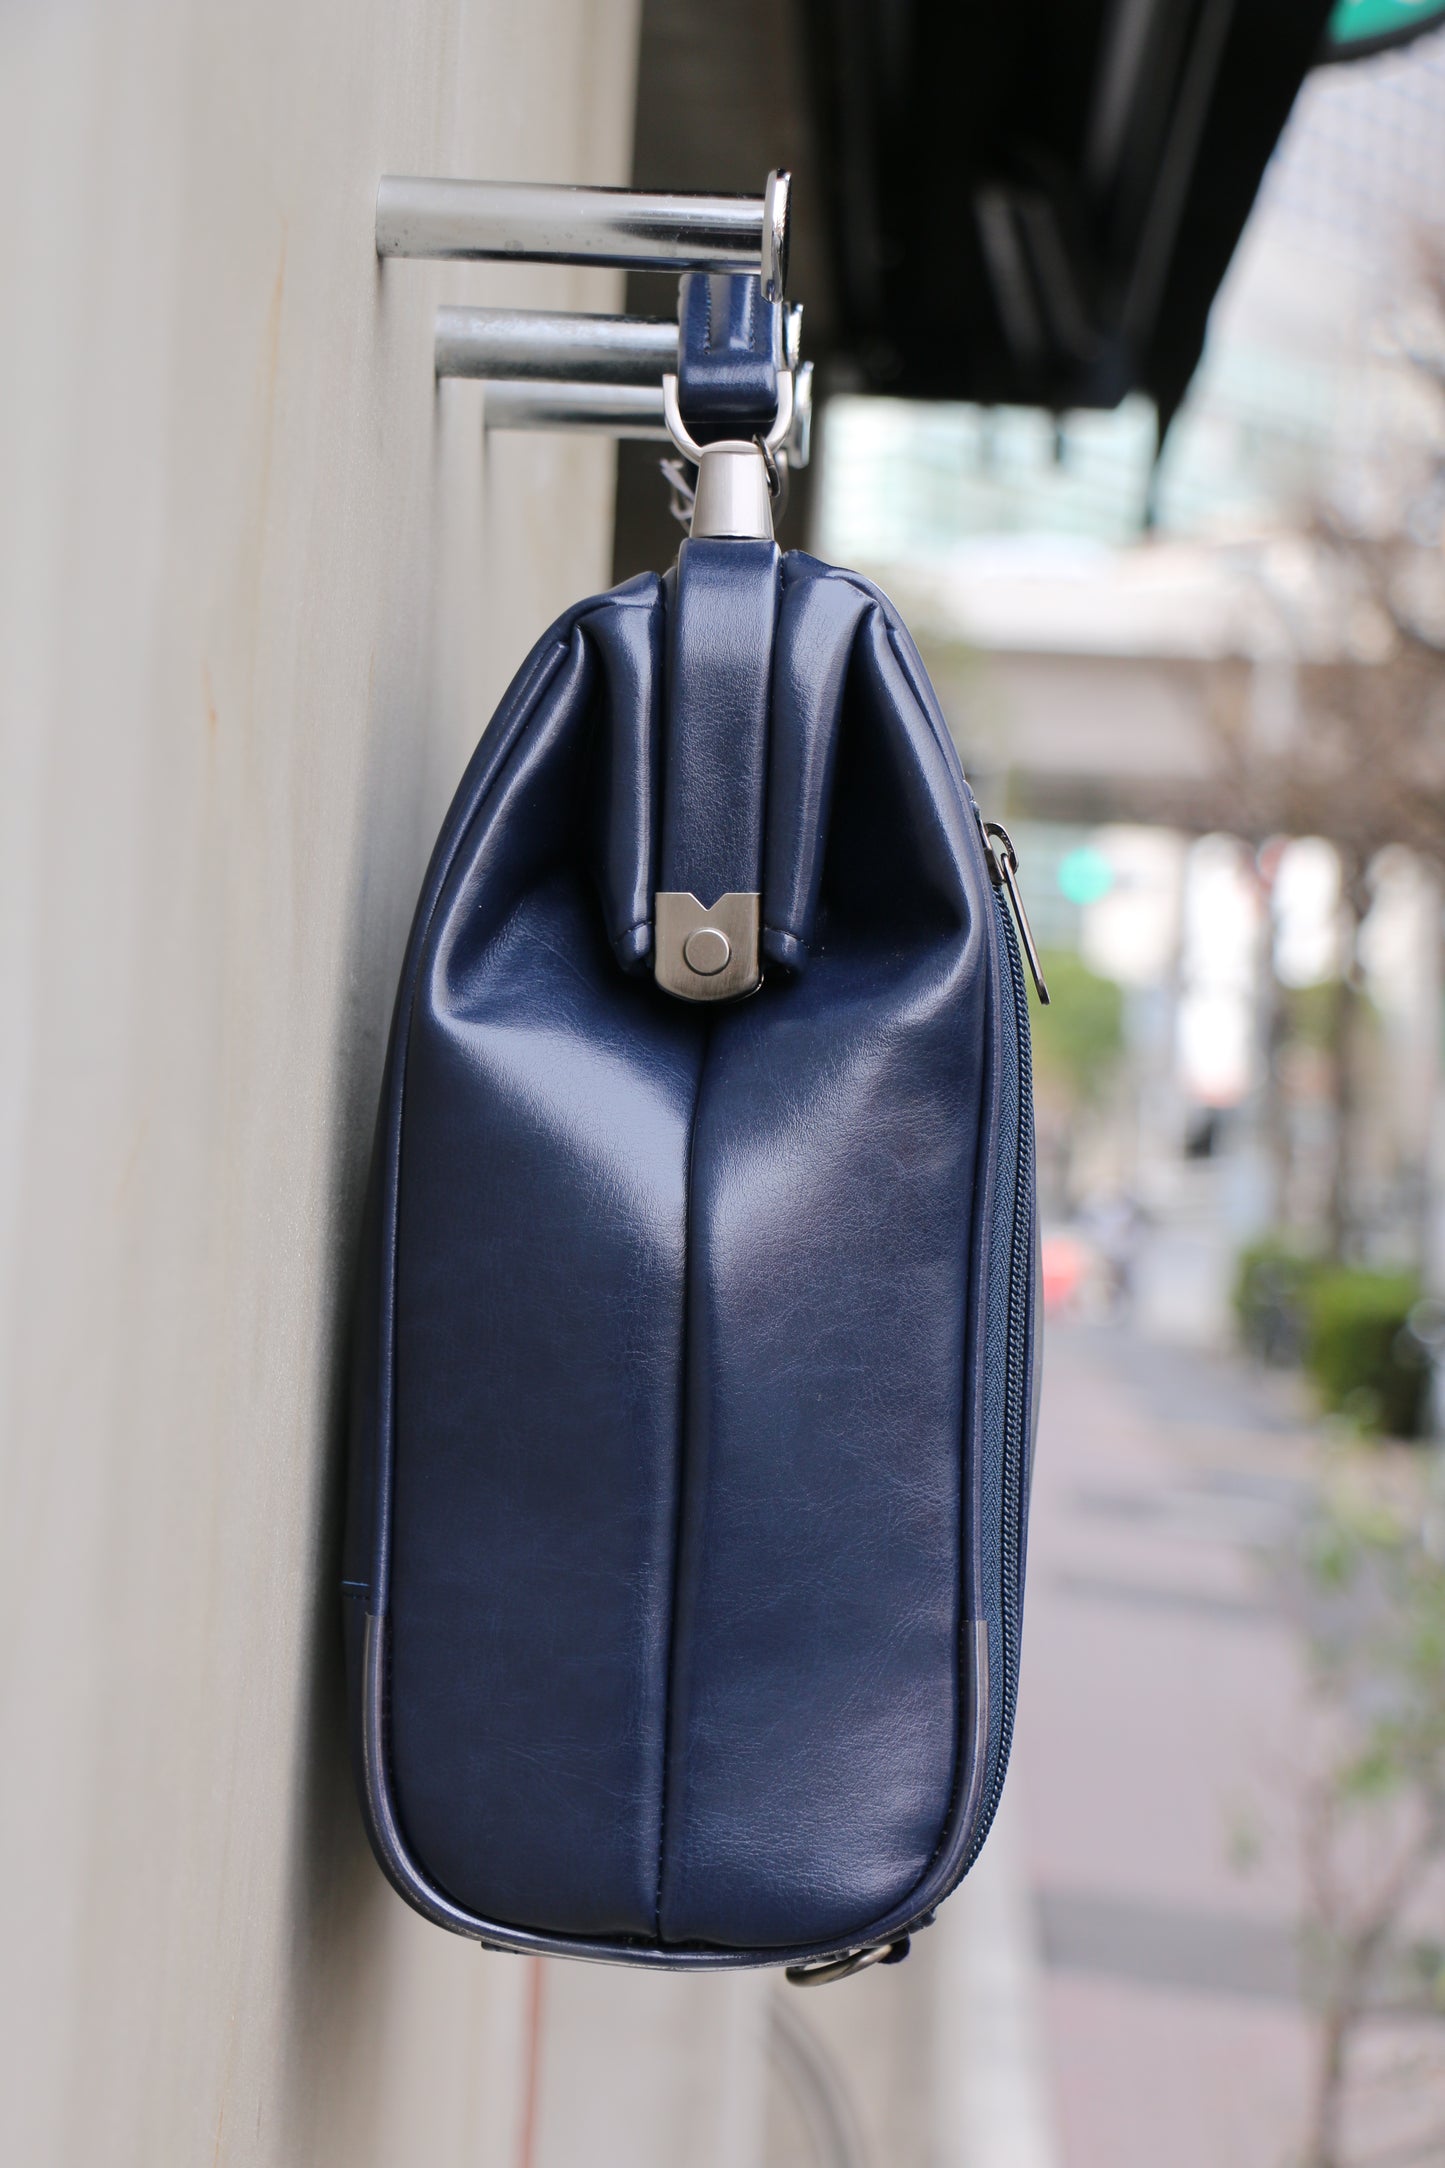 ◆Mini Dulles Bag XS Size Lacquered Wooden Handle SET Y60 [LIGHT] Navy